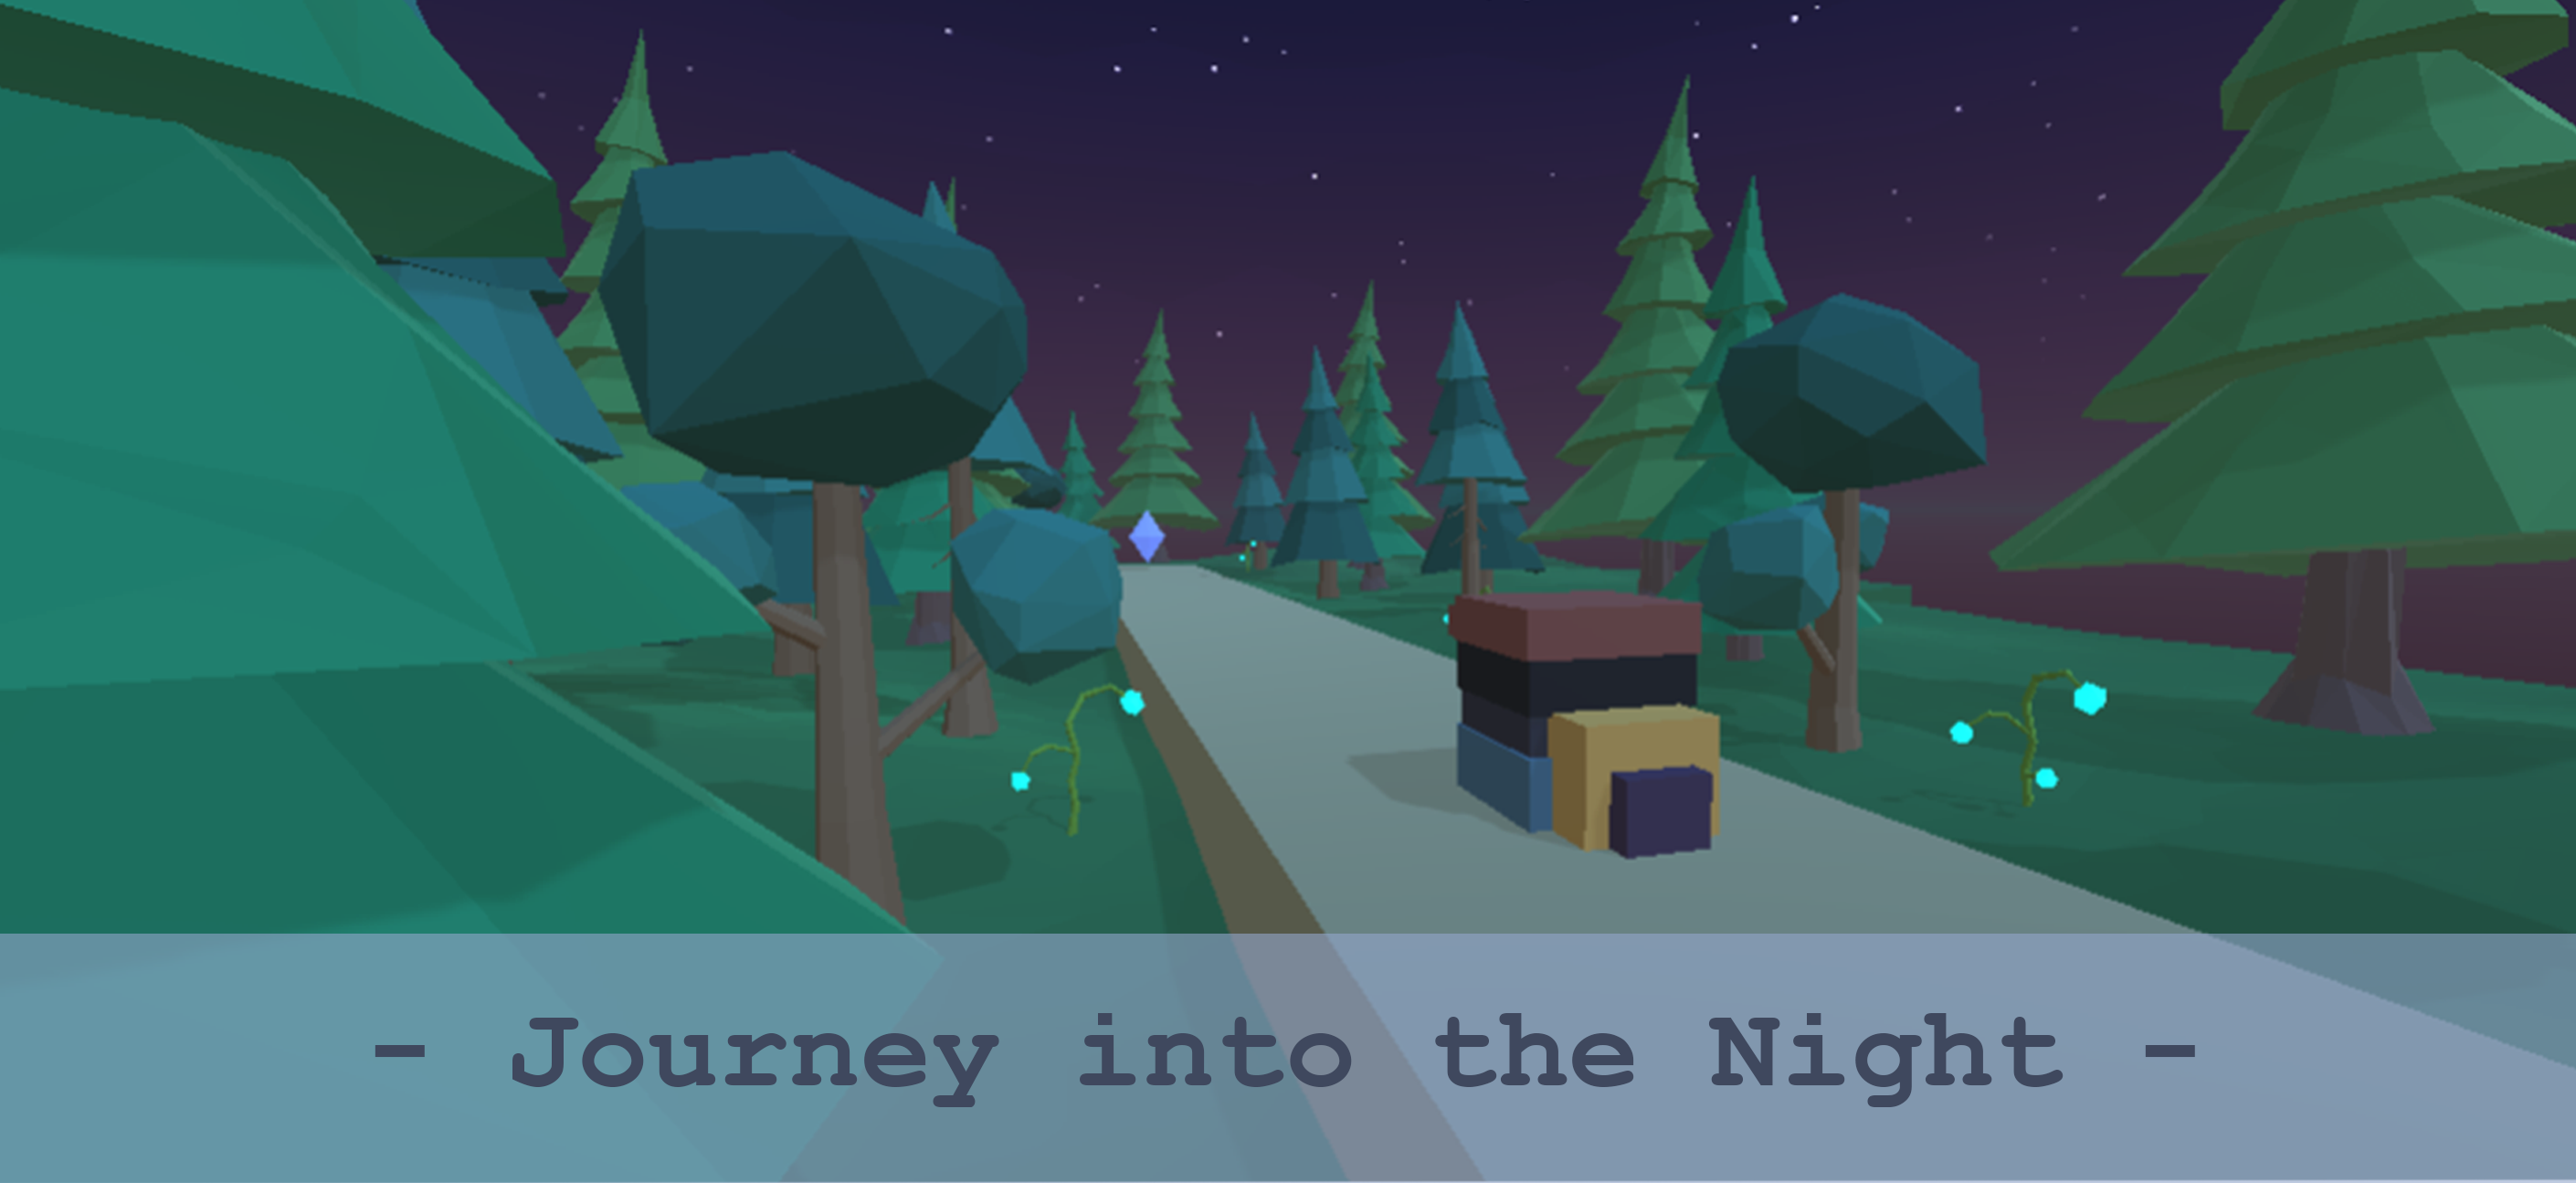 Journey into the Night